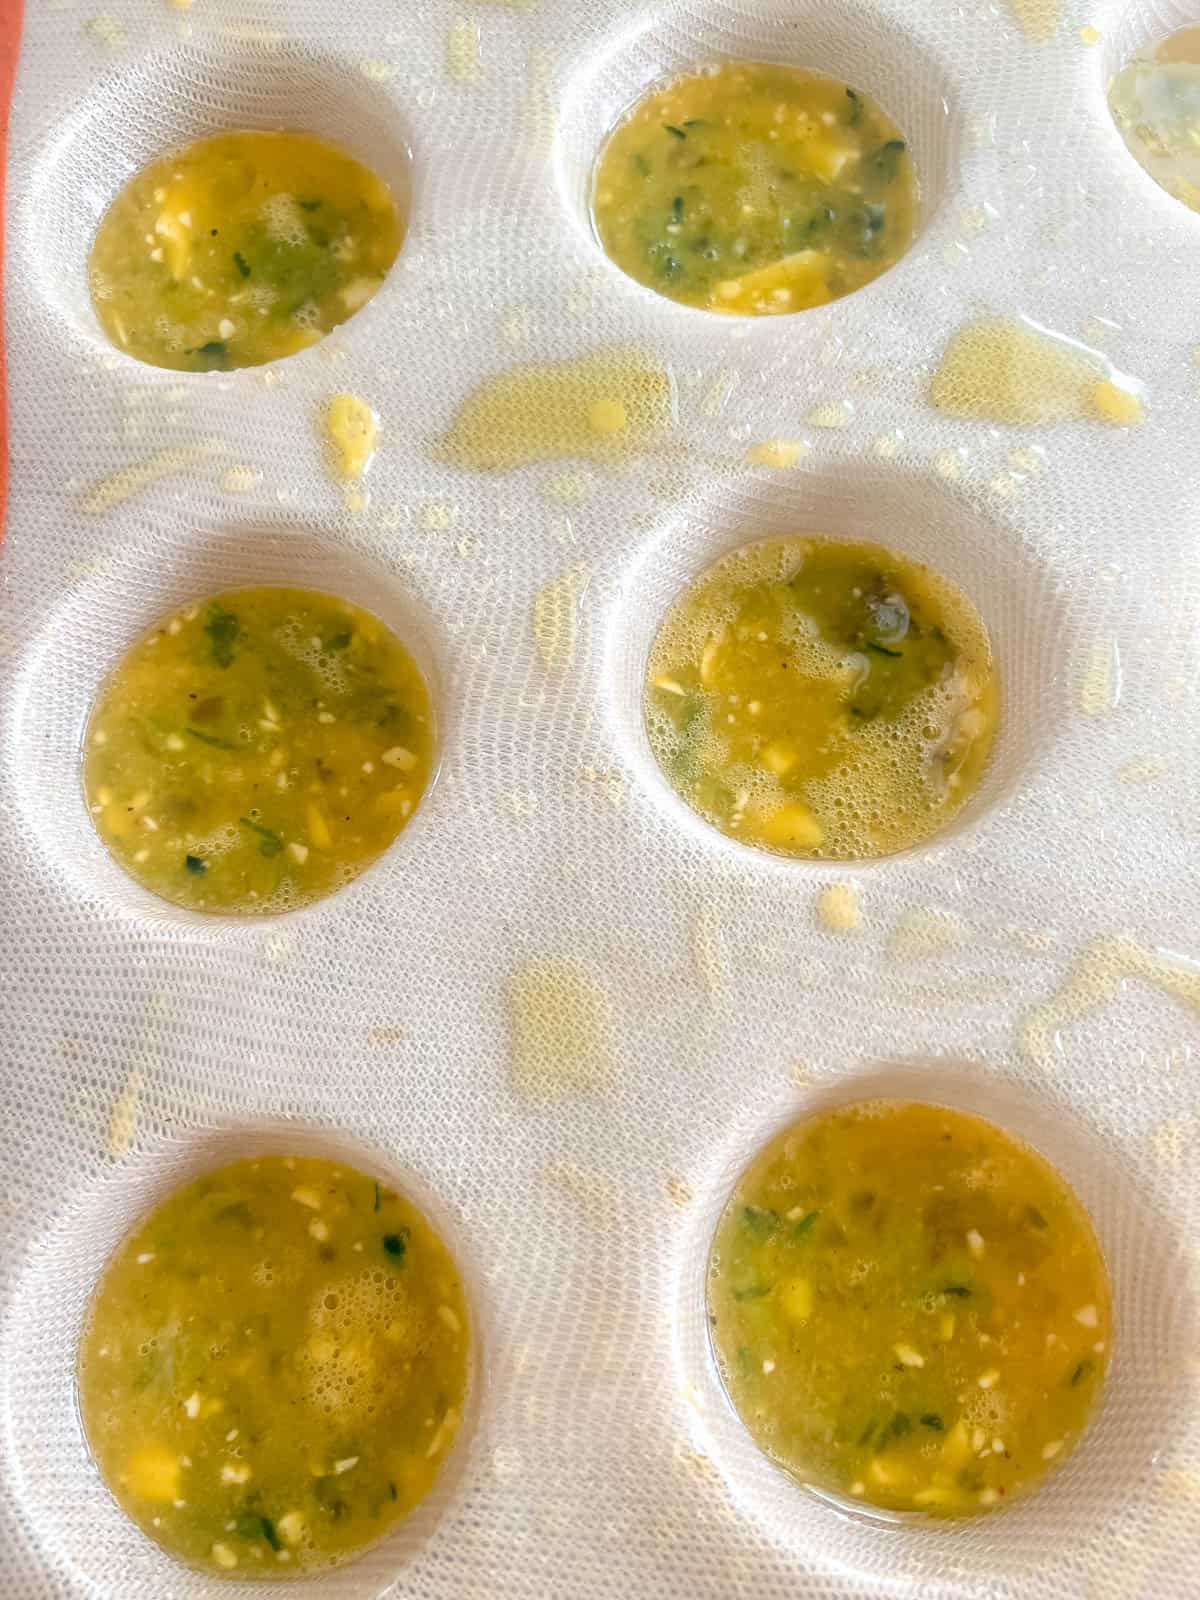 Egg mixture in silicone muffin tin.